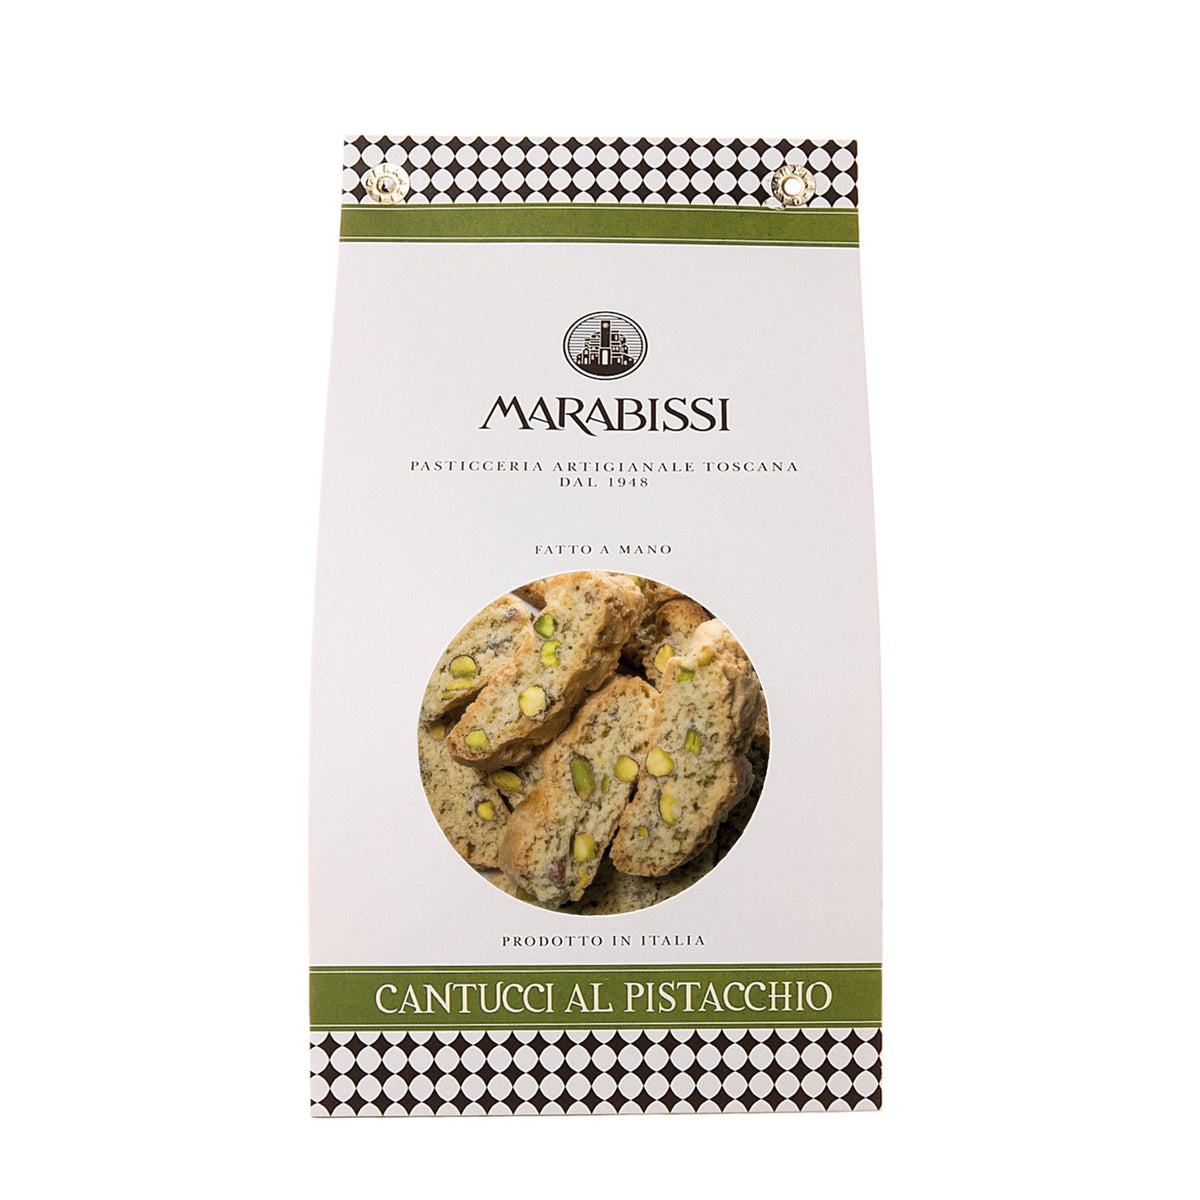 Marabissi Pistachio Cantucci (White Bag) 200g  | Imported and distributed in the UK by Just Gourmet Foods